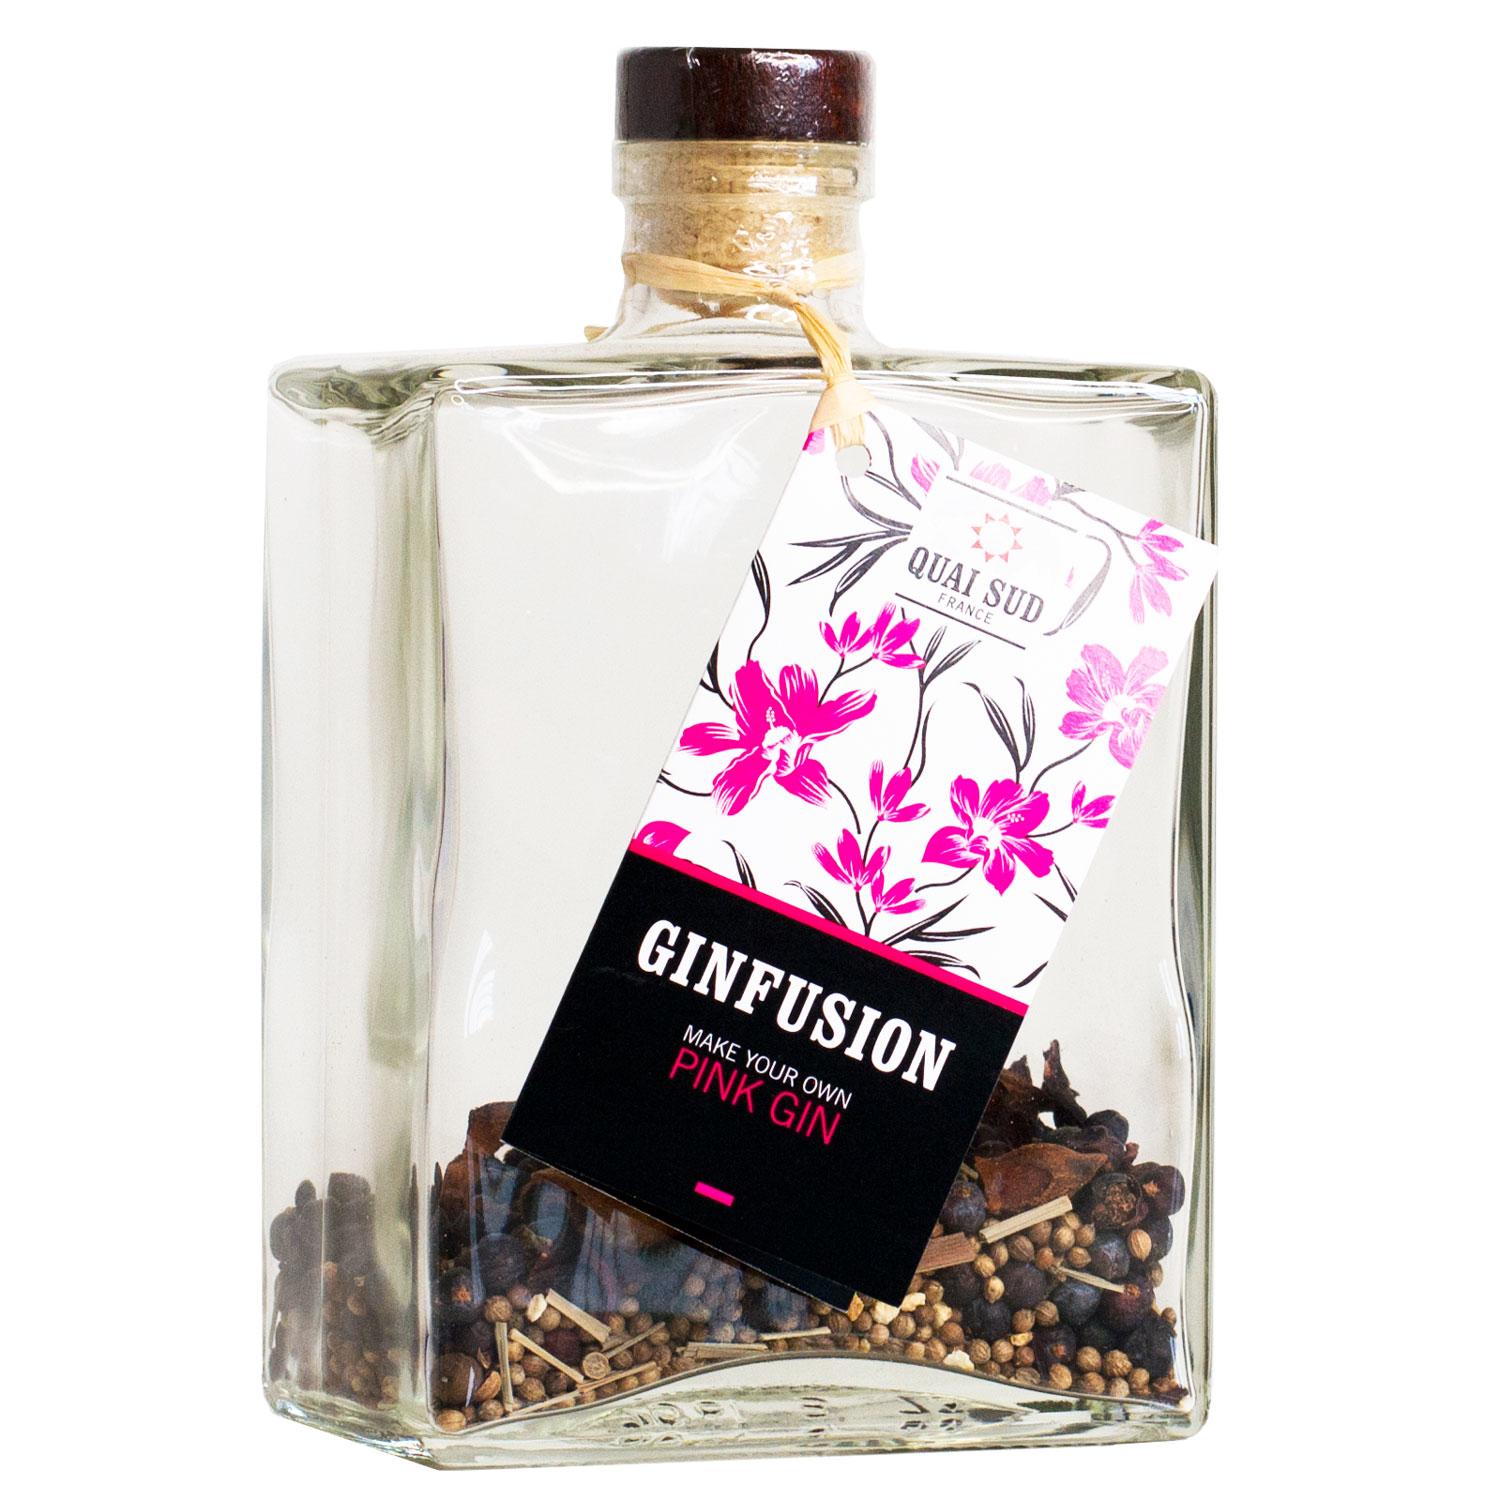 Make Your Own Pink Gin